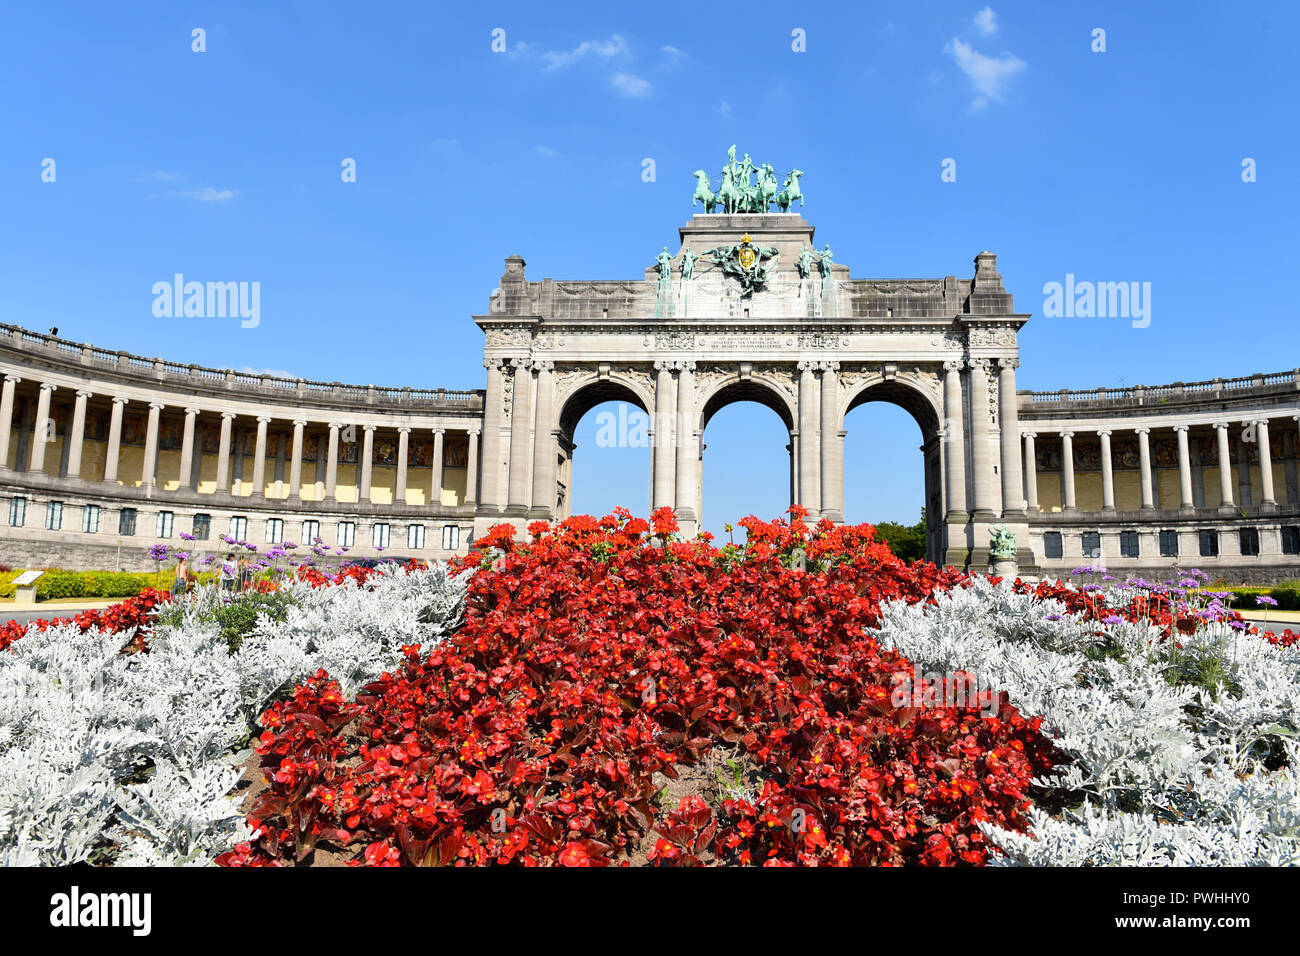 A view of the monumental triumphal arch in the Cinquantenaire Park in Brussels Stock Photo